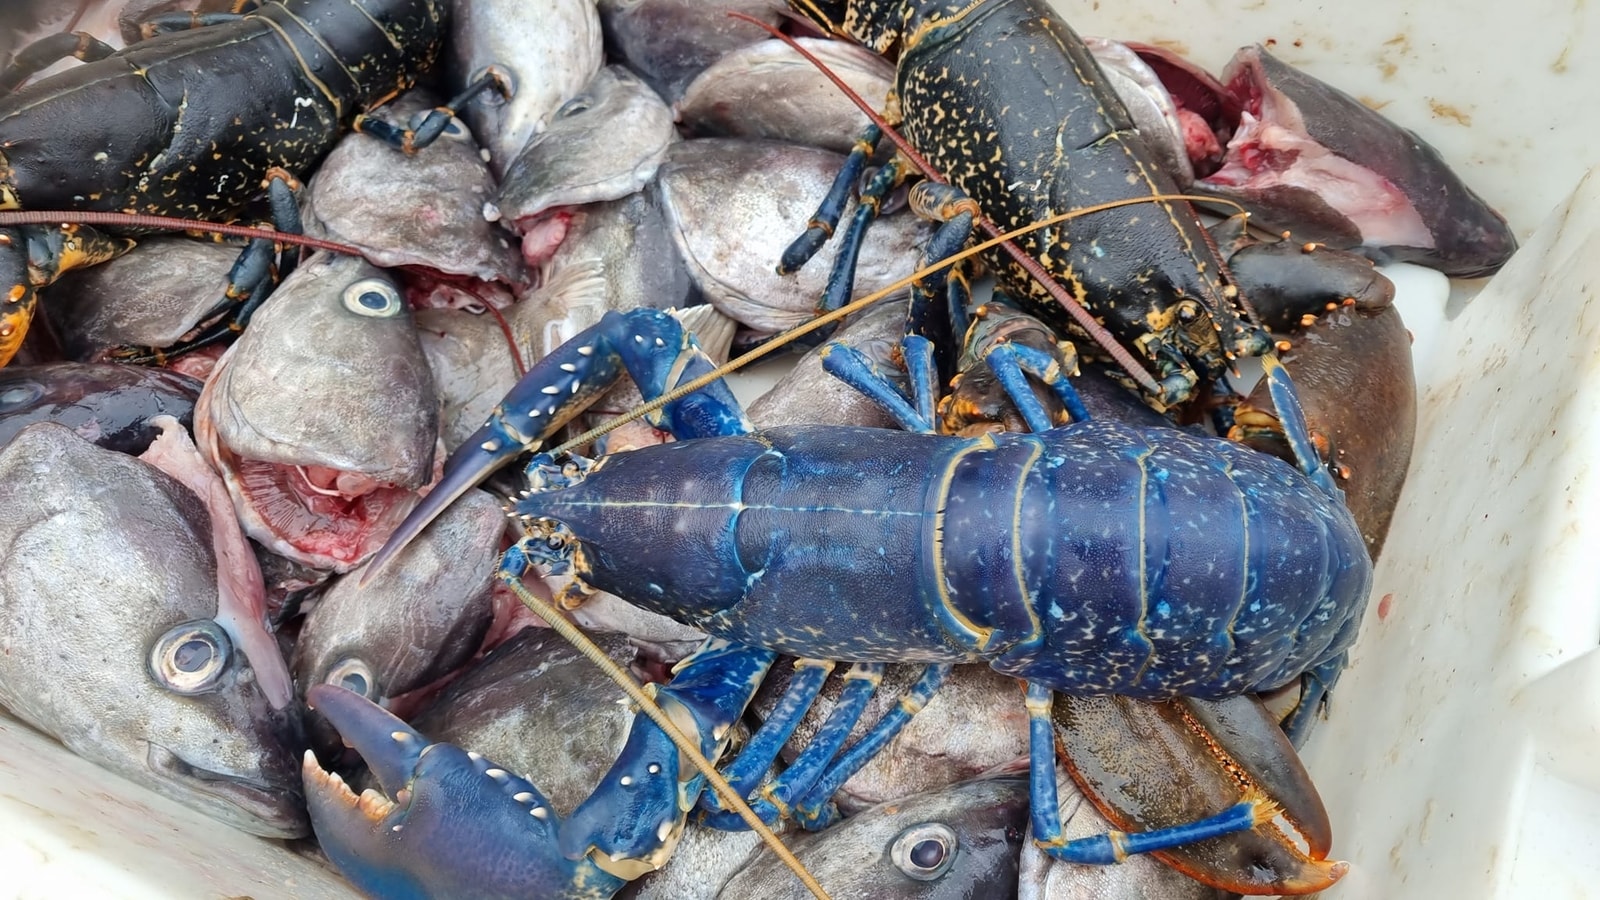 One in a million': Fisherman finds blue lobster, shares pics. Image go viral